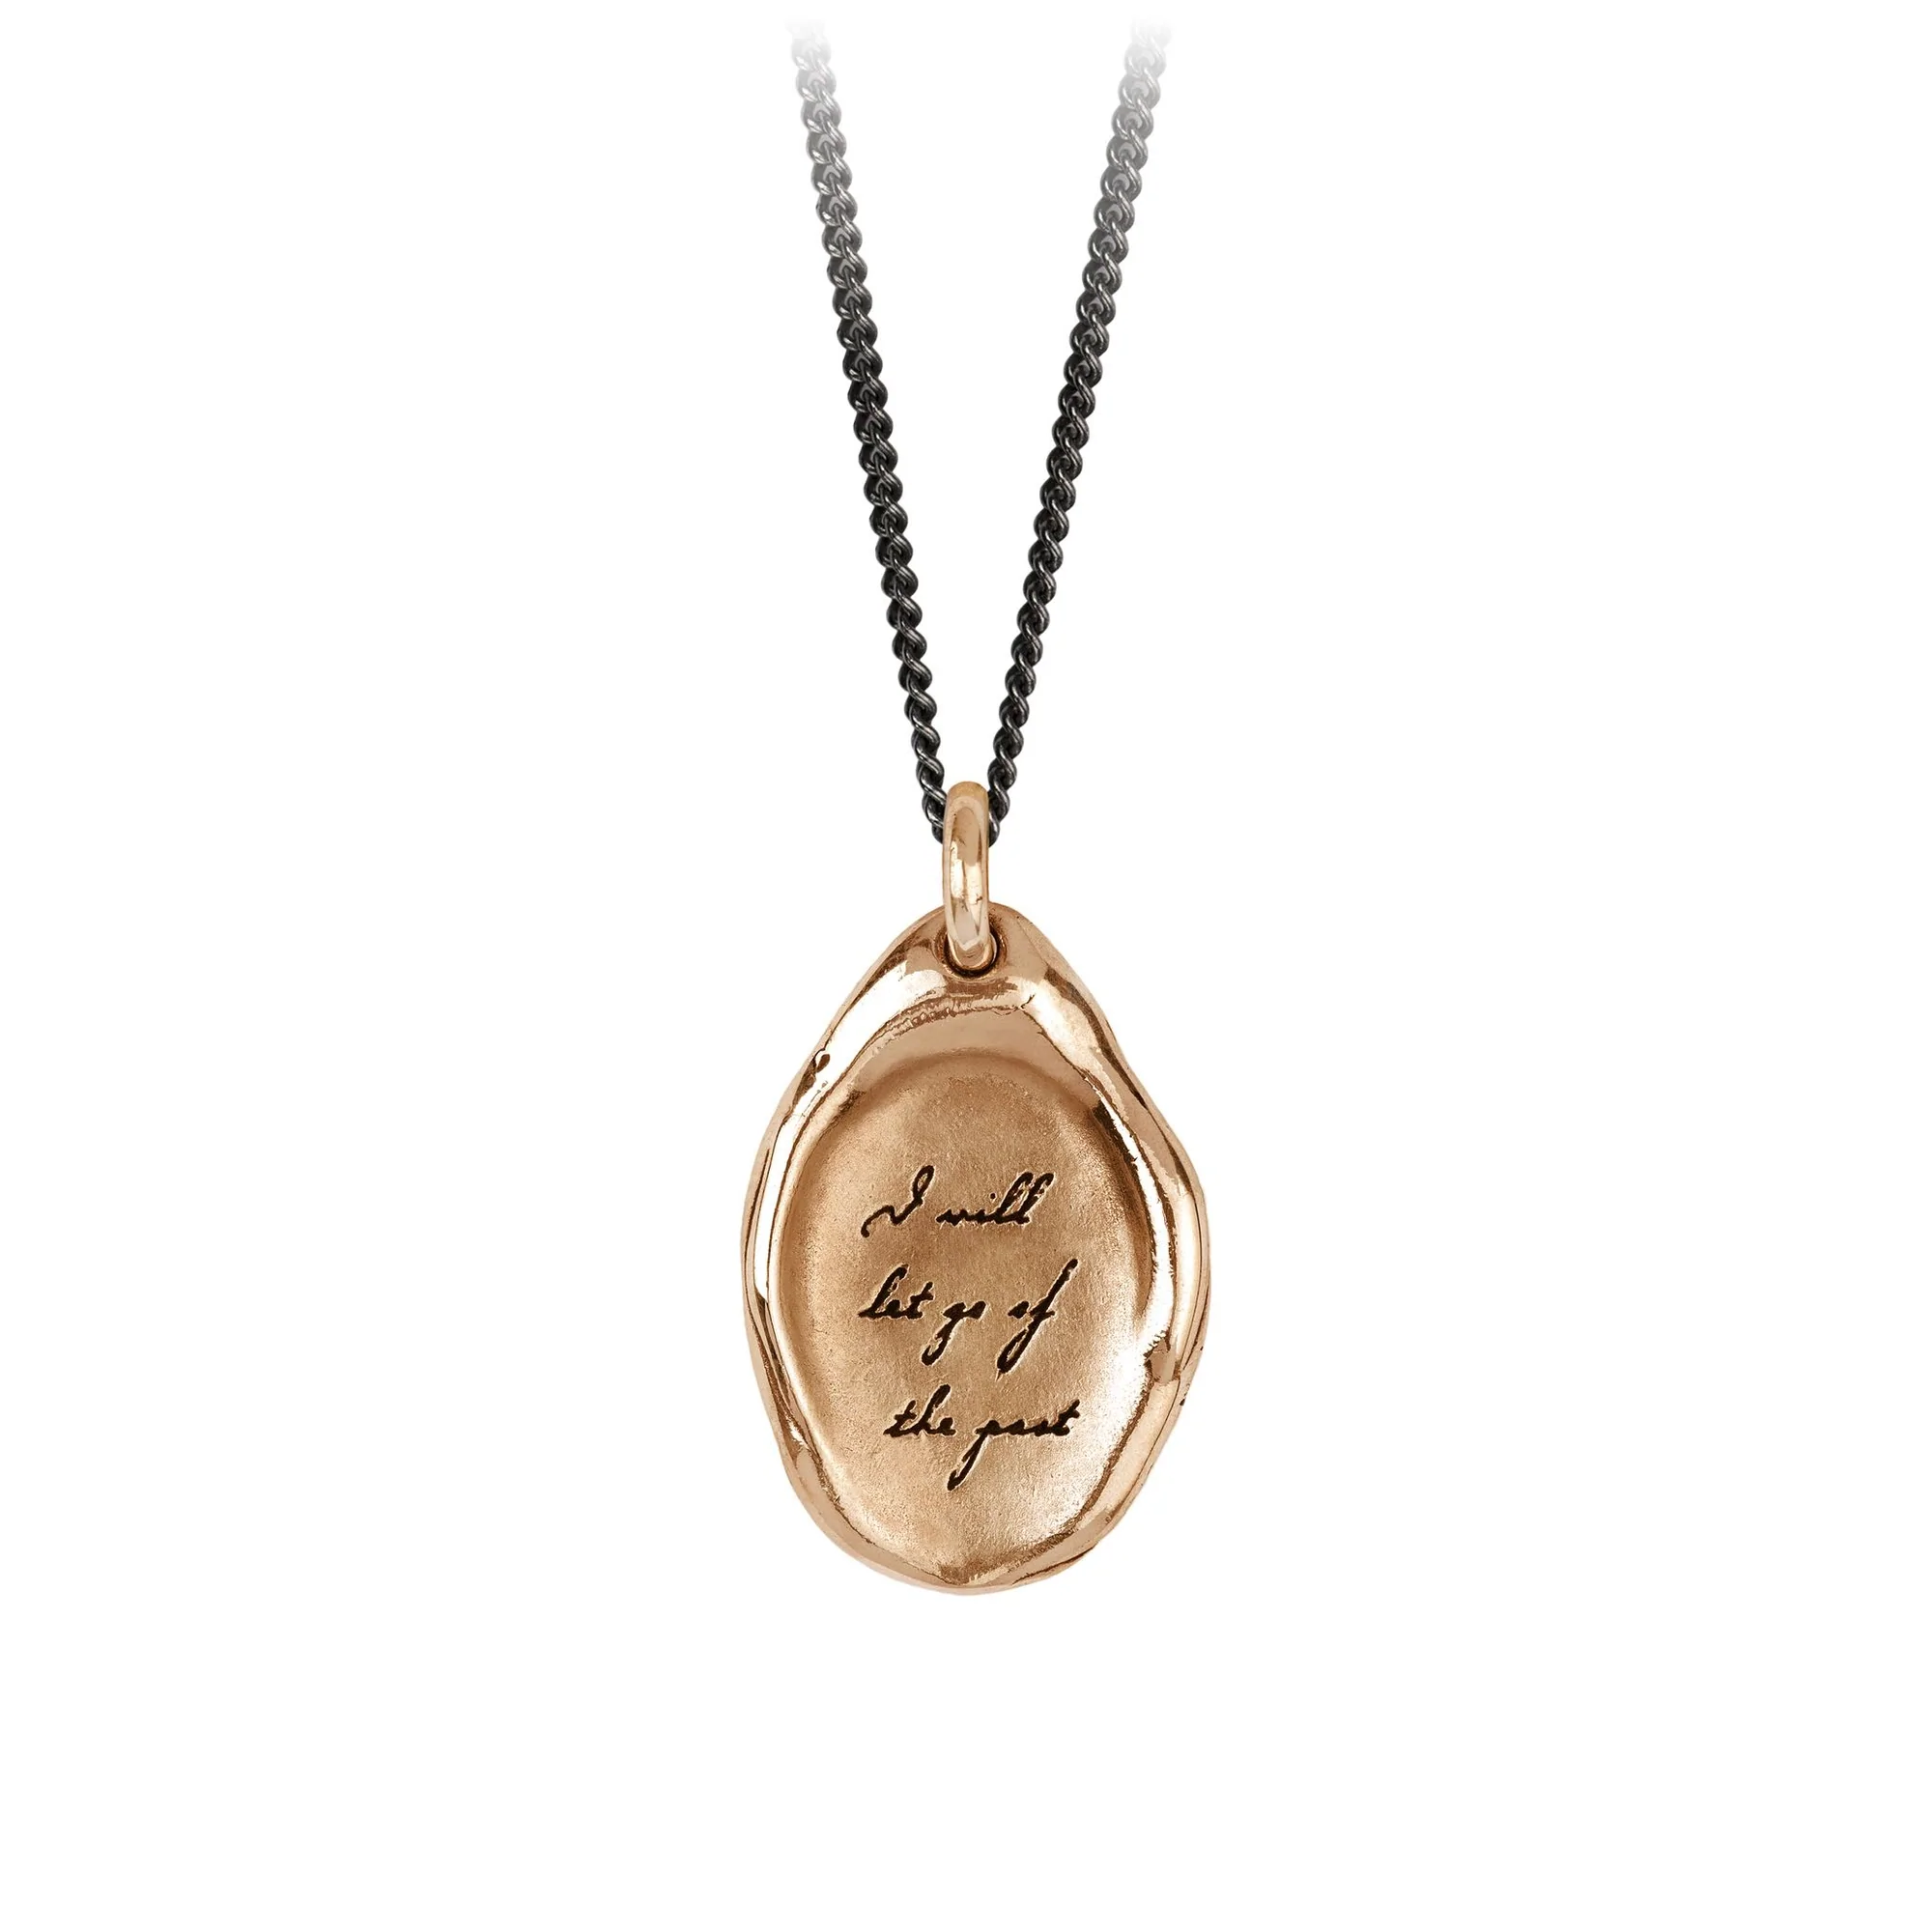 I Will Let Go Of The Past Affirmation Talisman | Magpie Jewellery